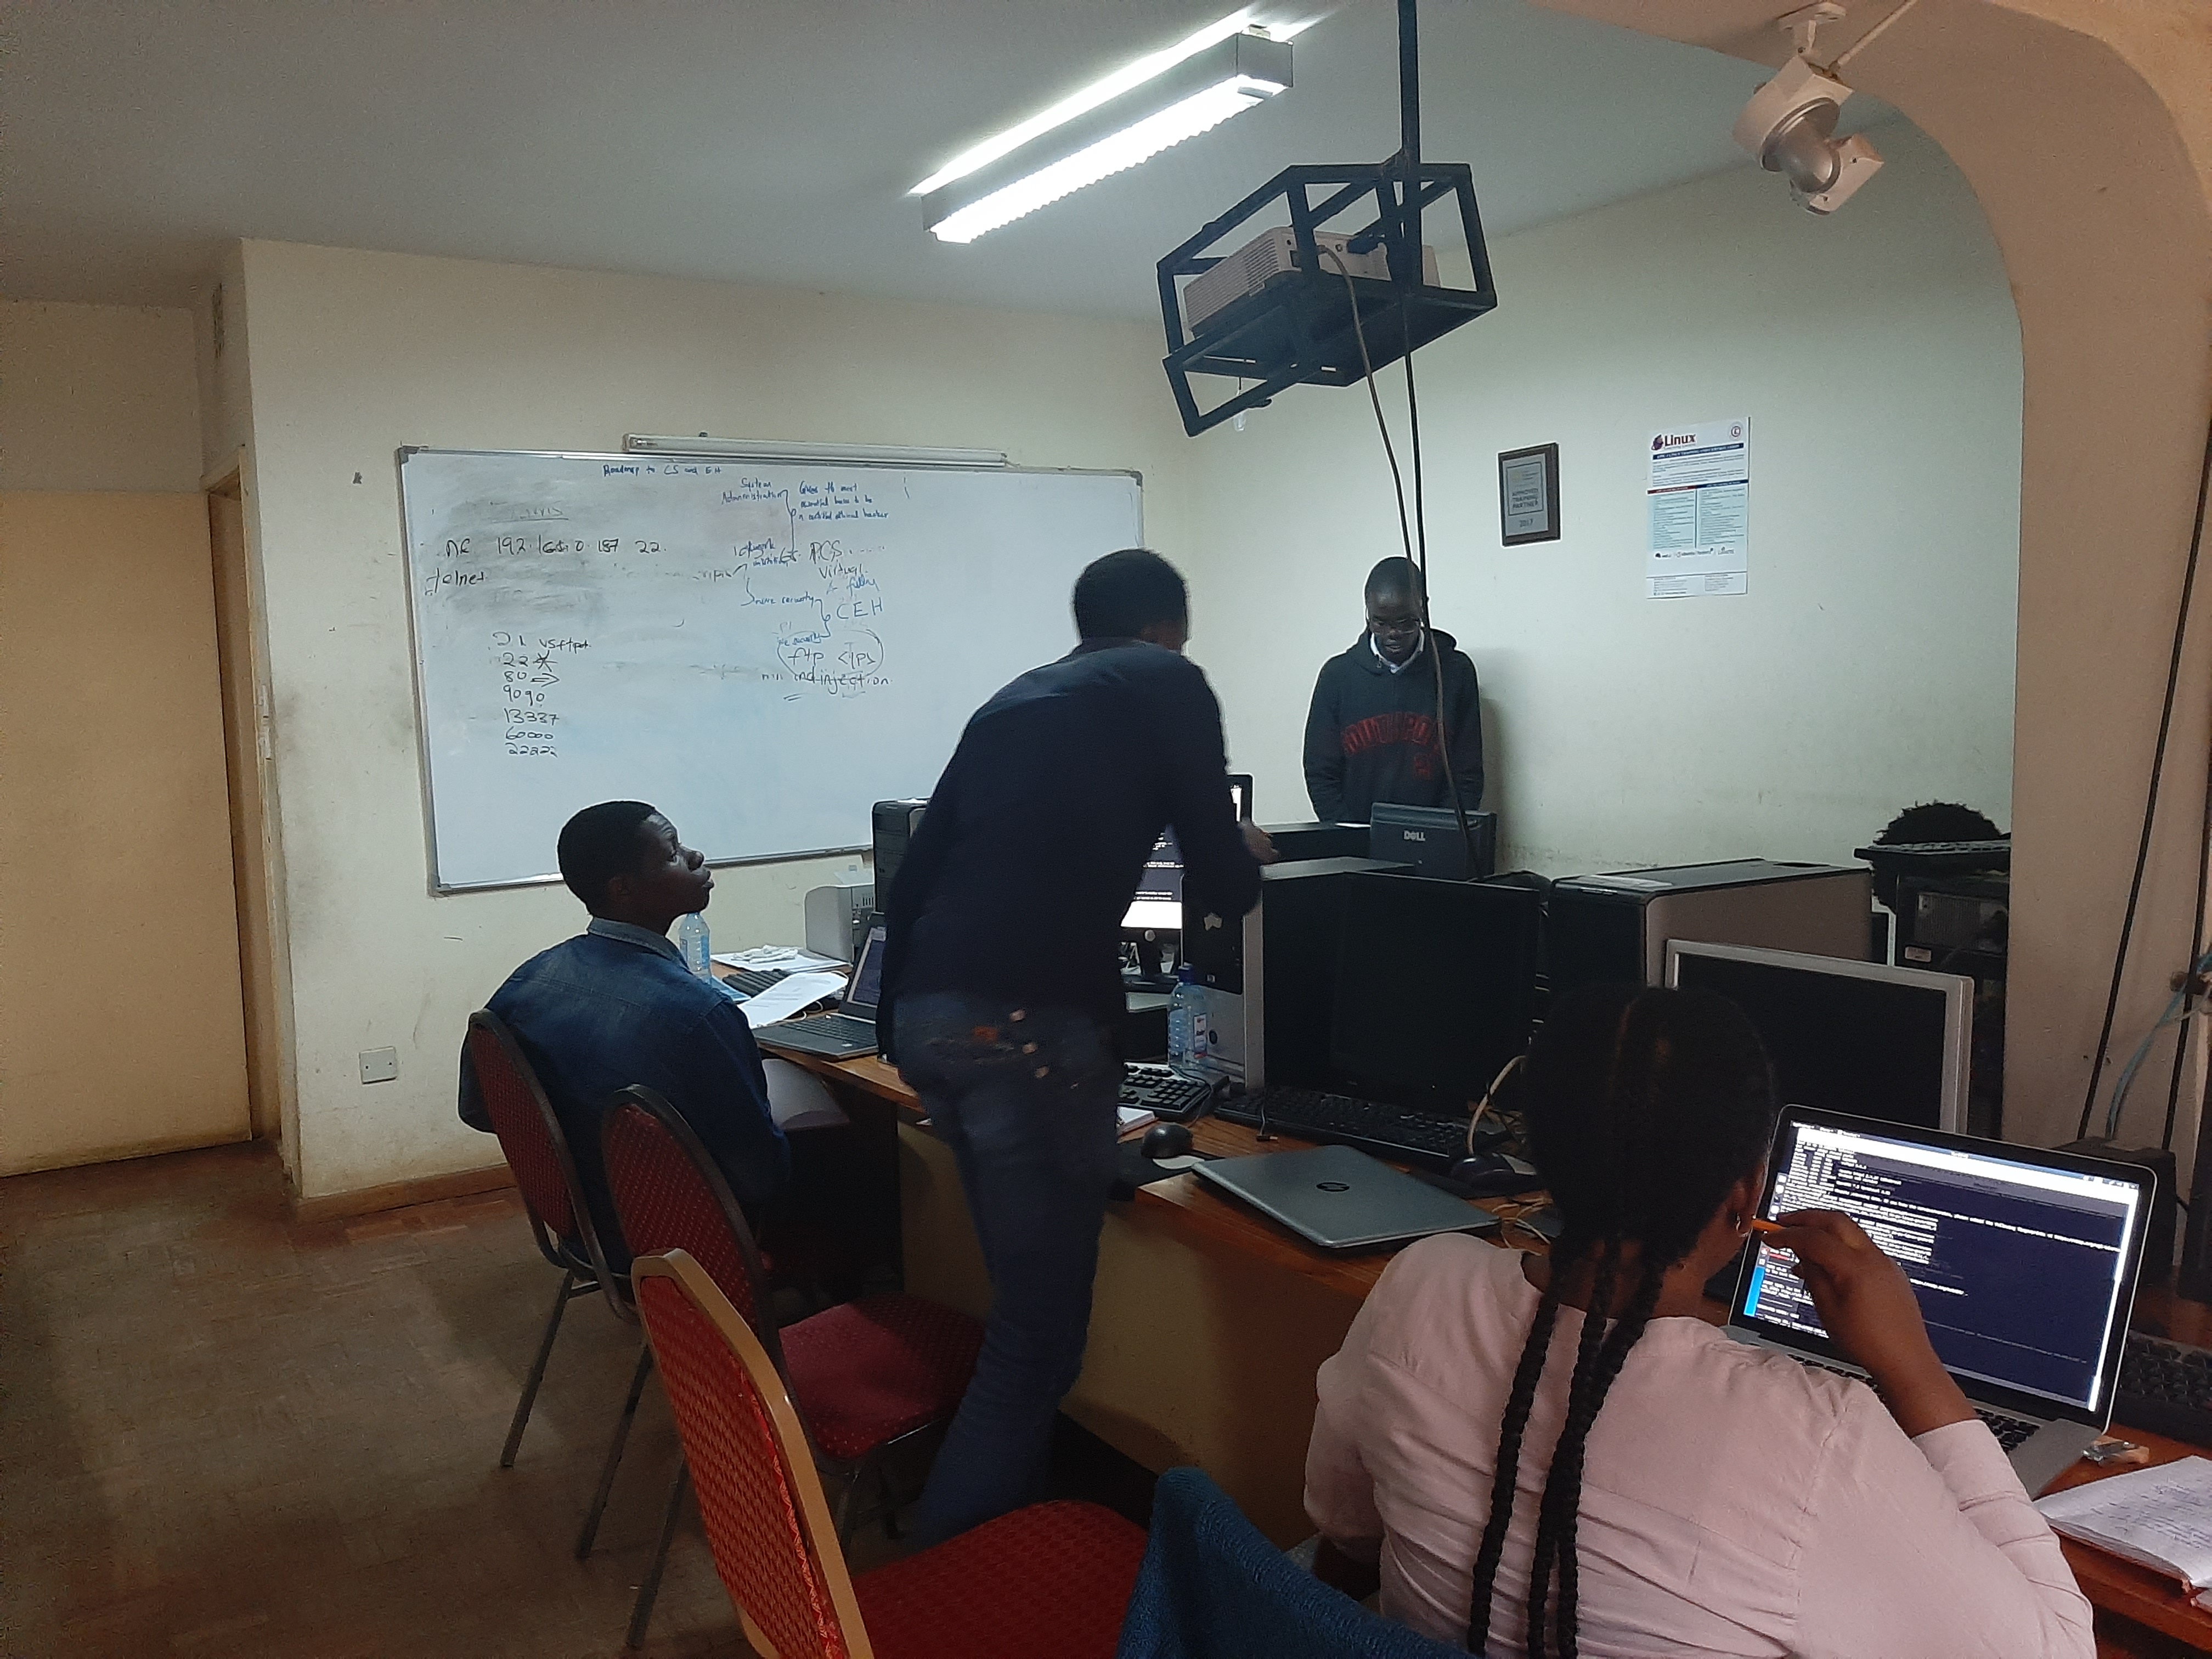 LLC 503 ADVANCED CYBERSECURITY AND ETHICAL HACKING CERTIFICATION TRAINING IN PROGRESS AT LINUX LEARNING CENTRE LTD, NAIROBI - HURLINGHAM.